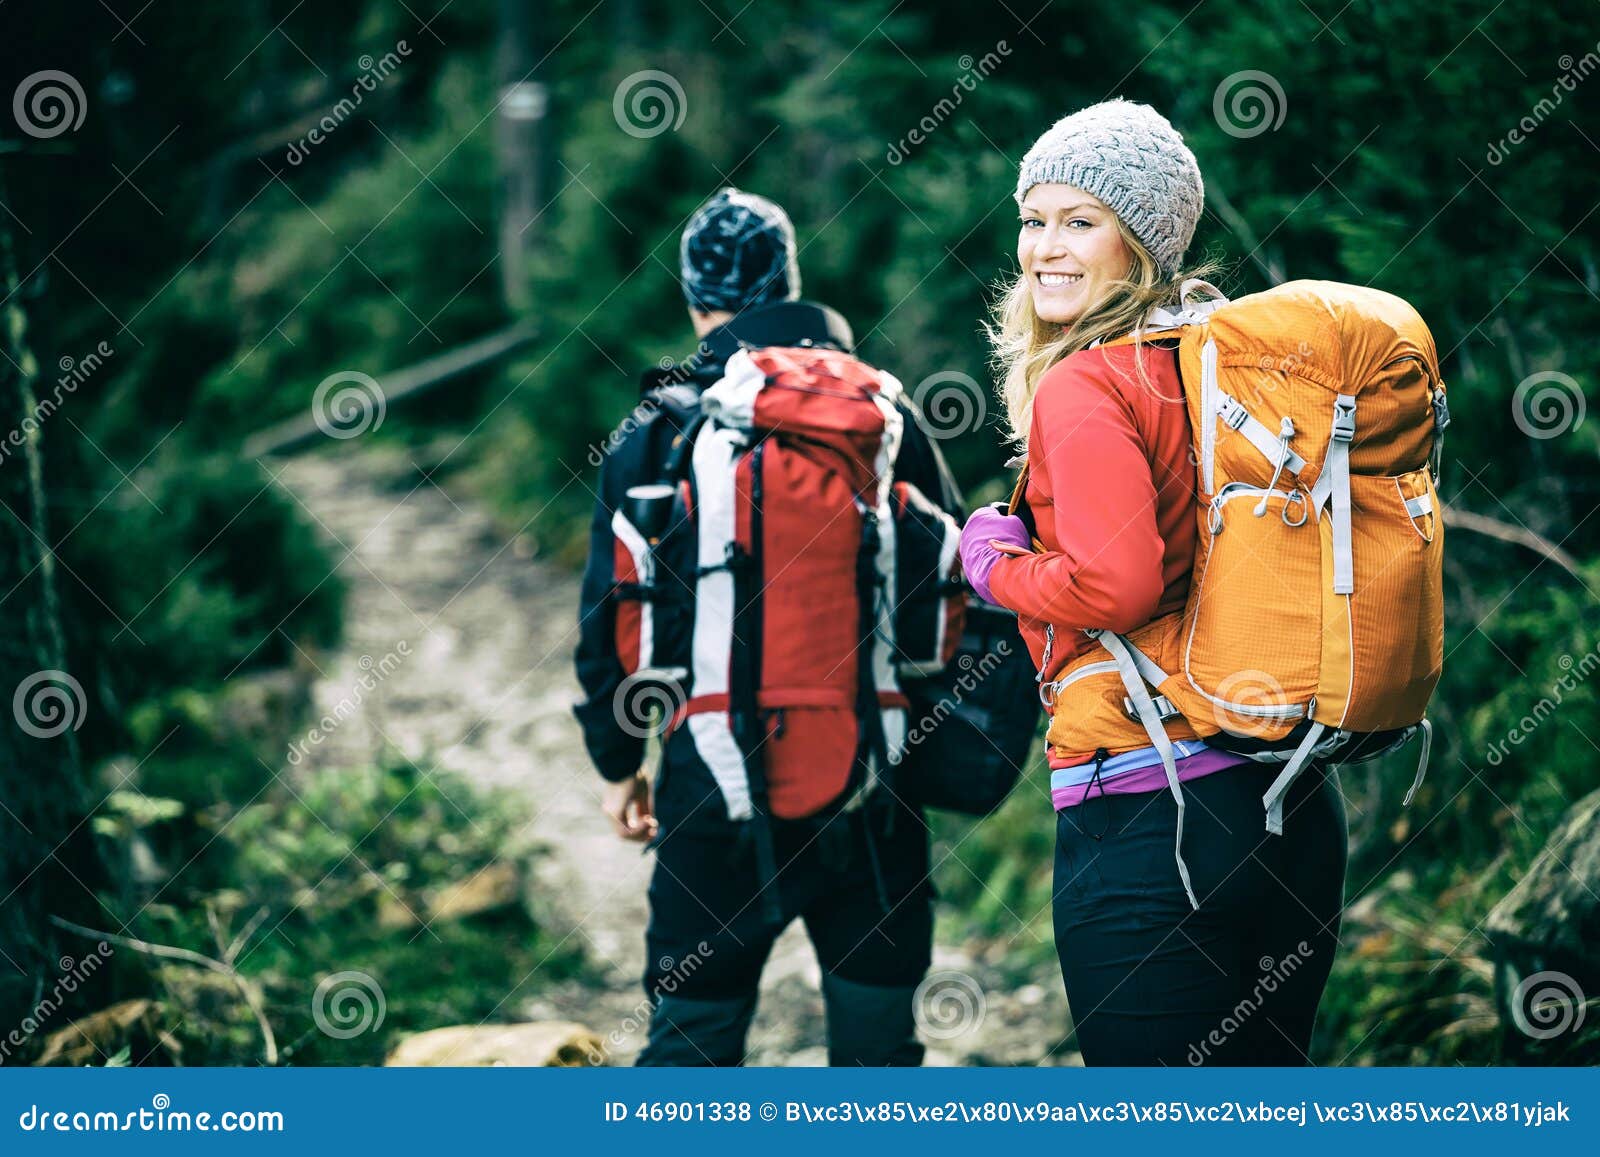 couple hikers walking in mountains